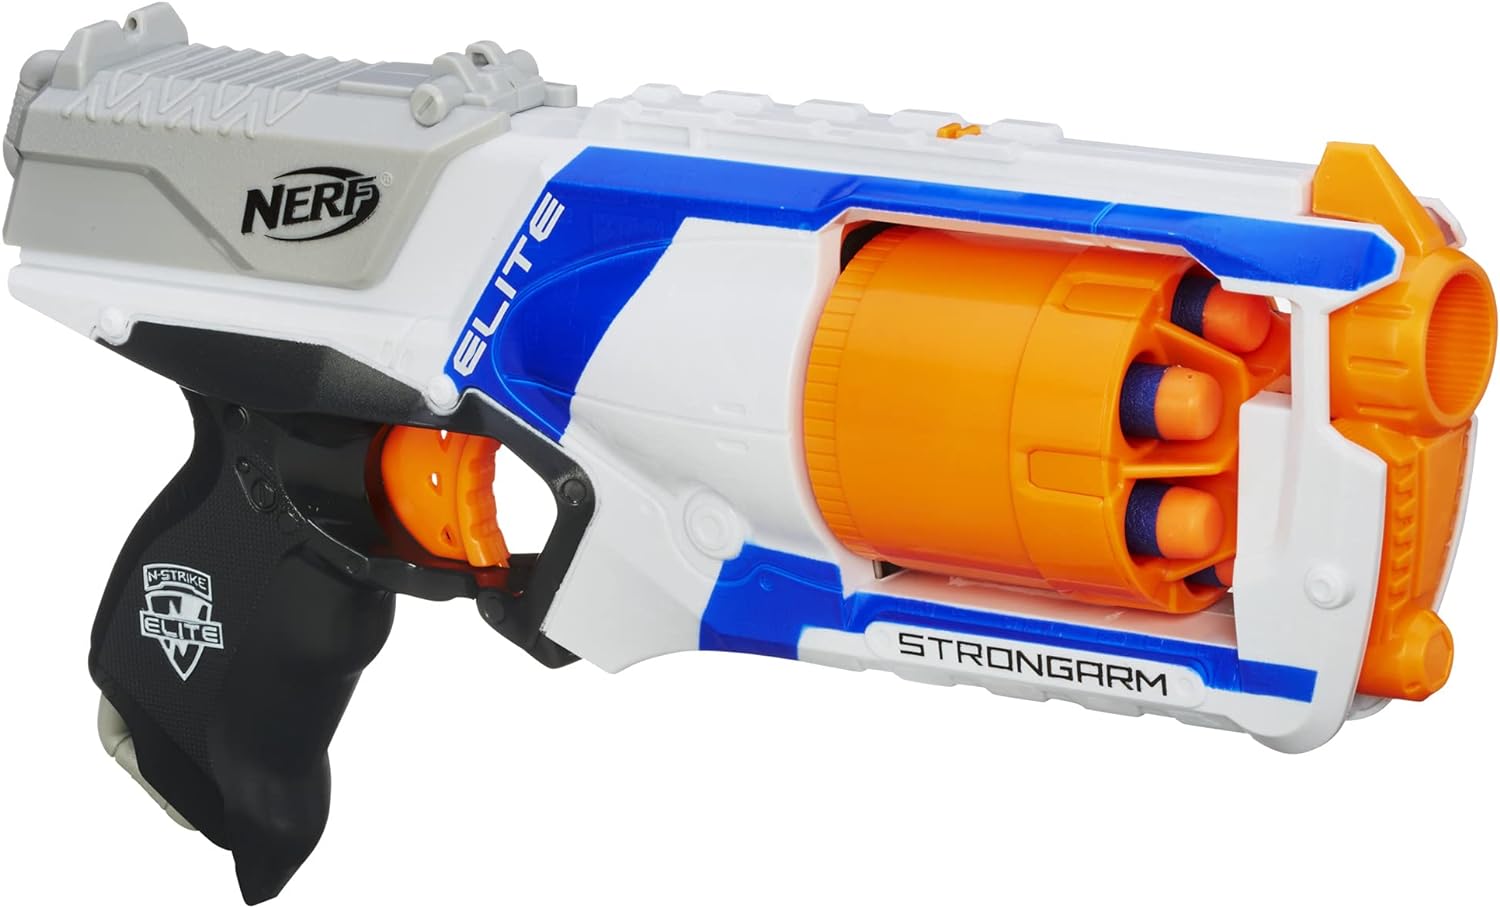 These Elite Strongarms are great beginner Nerf guns. They don't require batteries, they aren't too hard to load and cock, they are relatively inexpensive, and they have been reliable. I have also purchased the Nerf Triad Ex-3 (similar to the Nerf Jolt), and the Nerf Modulus (a battery powered magazine loading gun).Pros:They are inexpensive compared to the battery guns. The Triads were cheaper, but only held 3 shots, and 2 of 3 stopped working after half a year.They have been reliable. I initiall